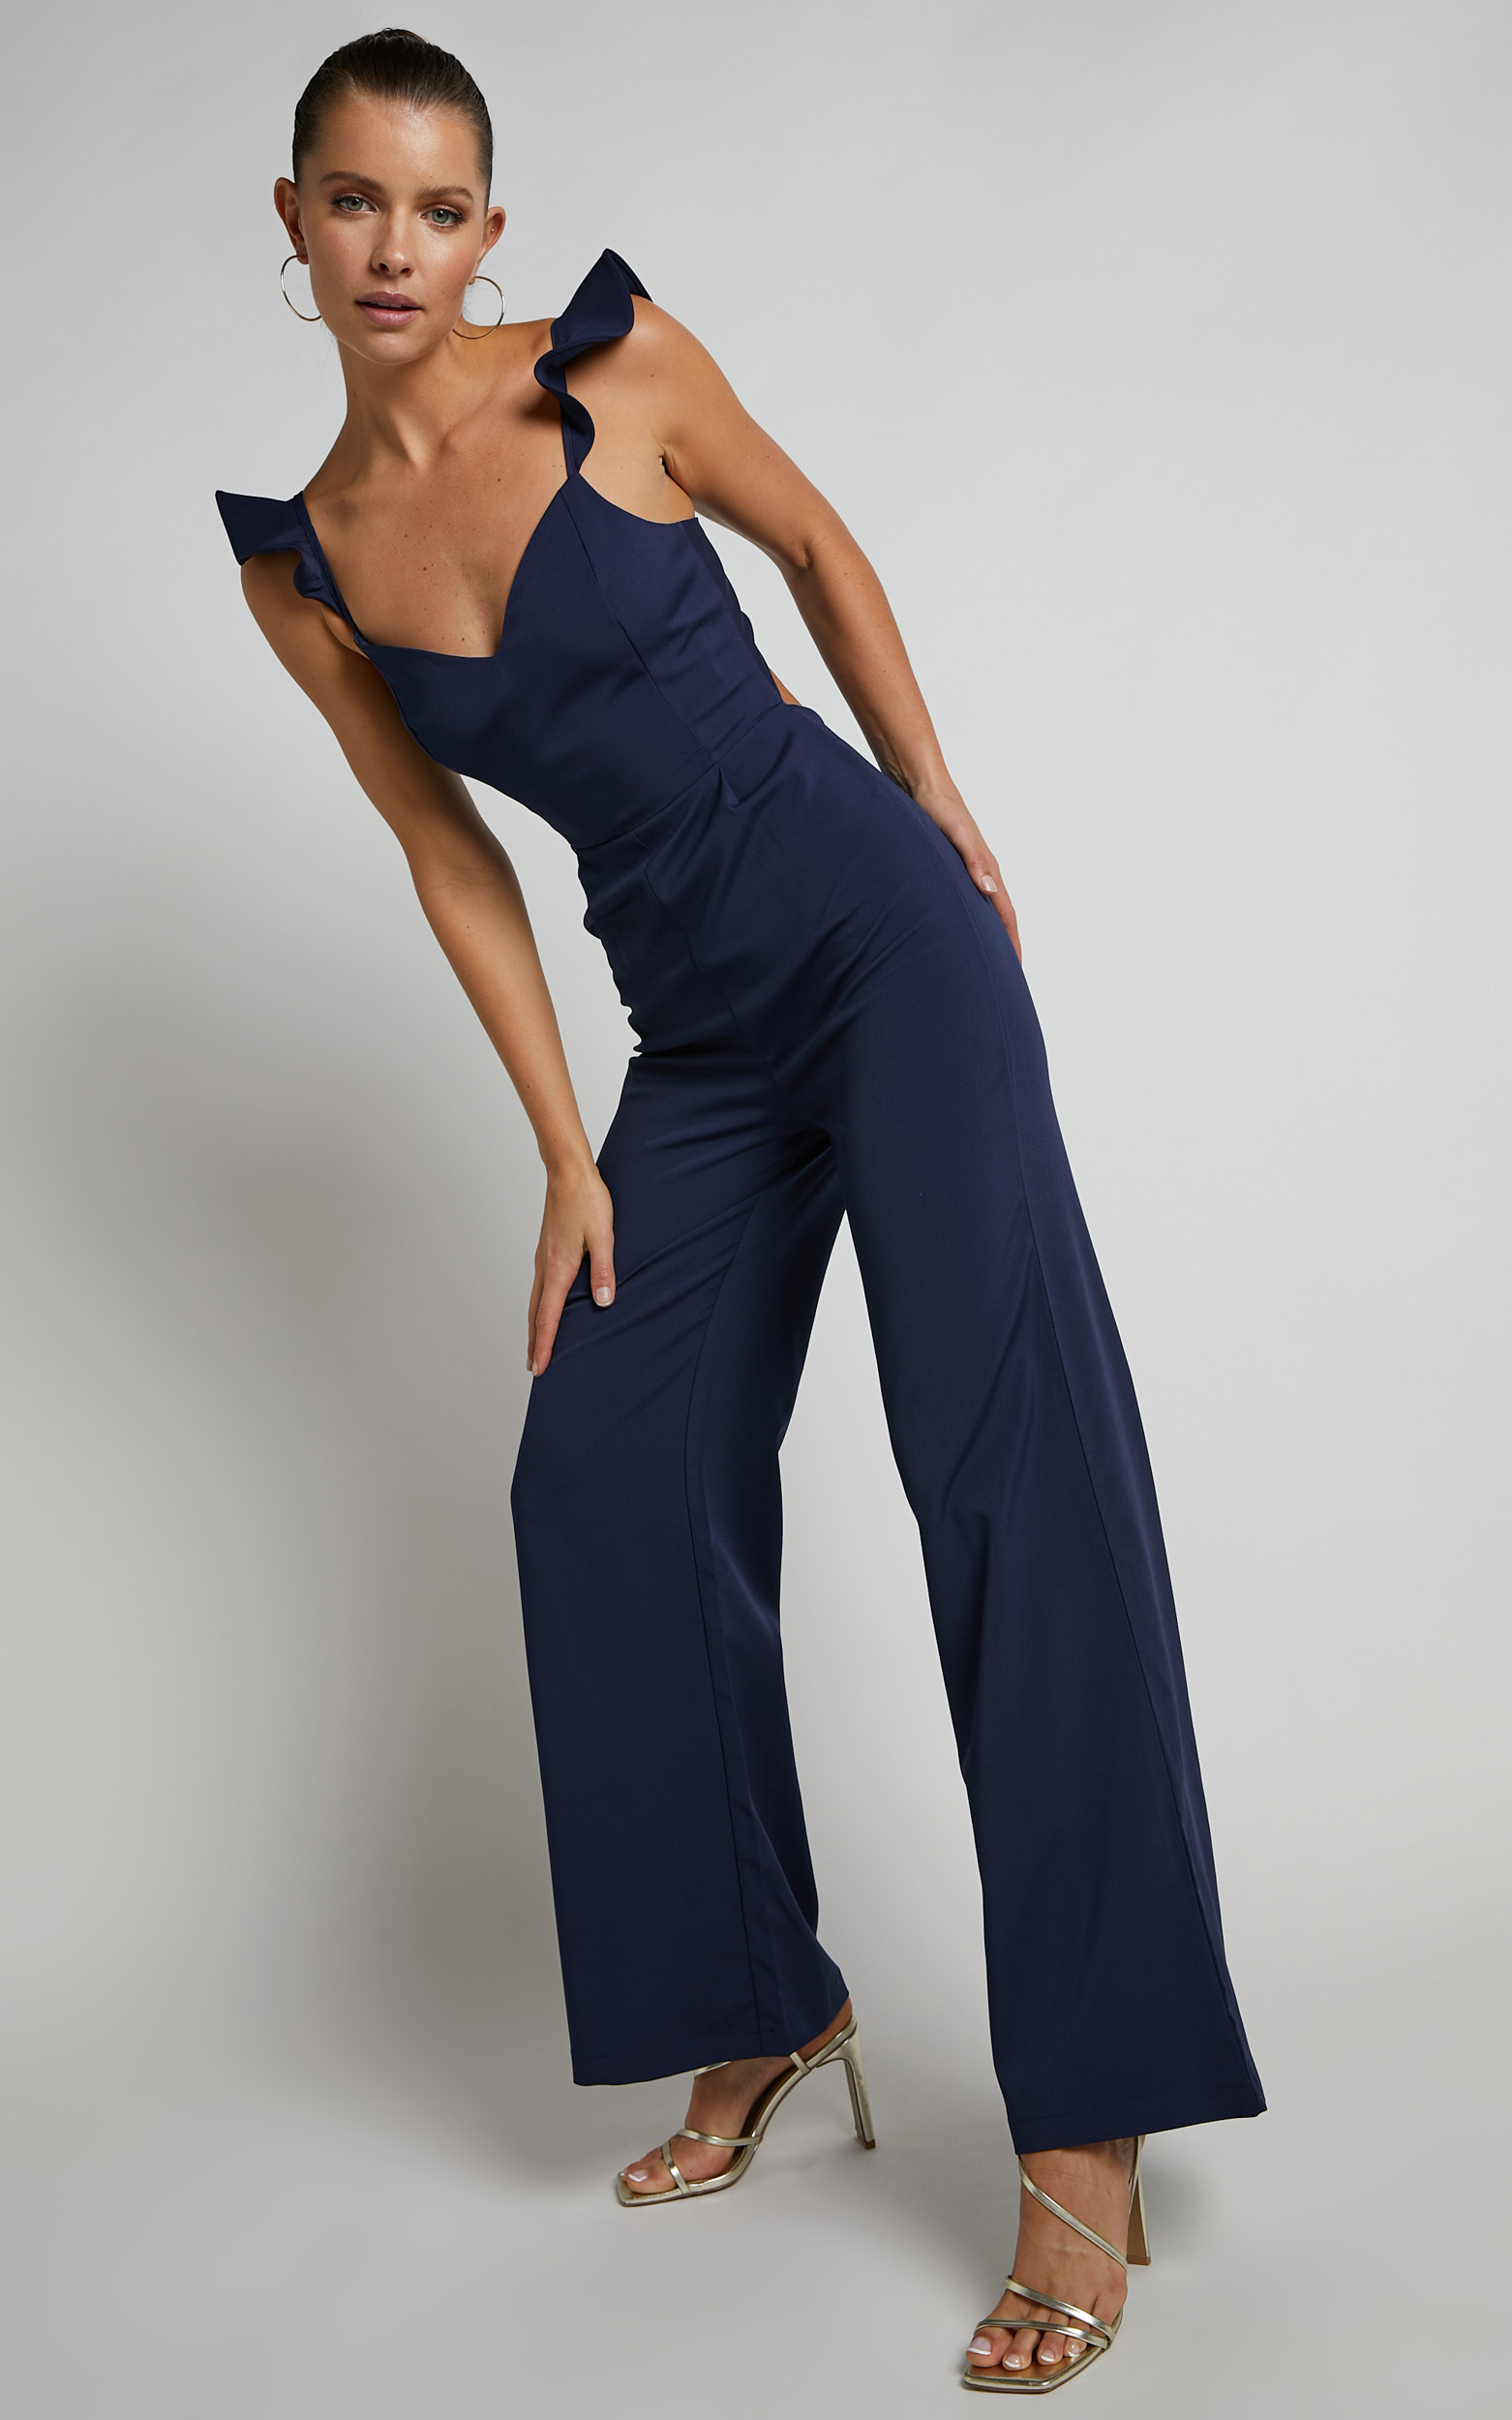 Rheinbell Straight Leg Jumpsuit in Navy - 06, NVY1, hi-res image number null